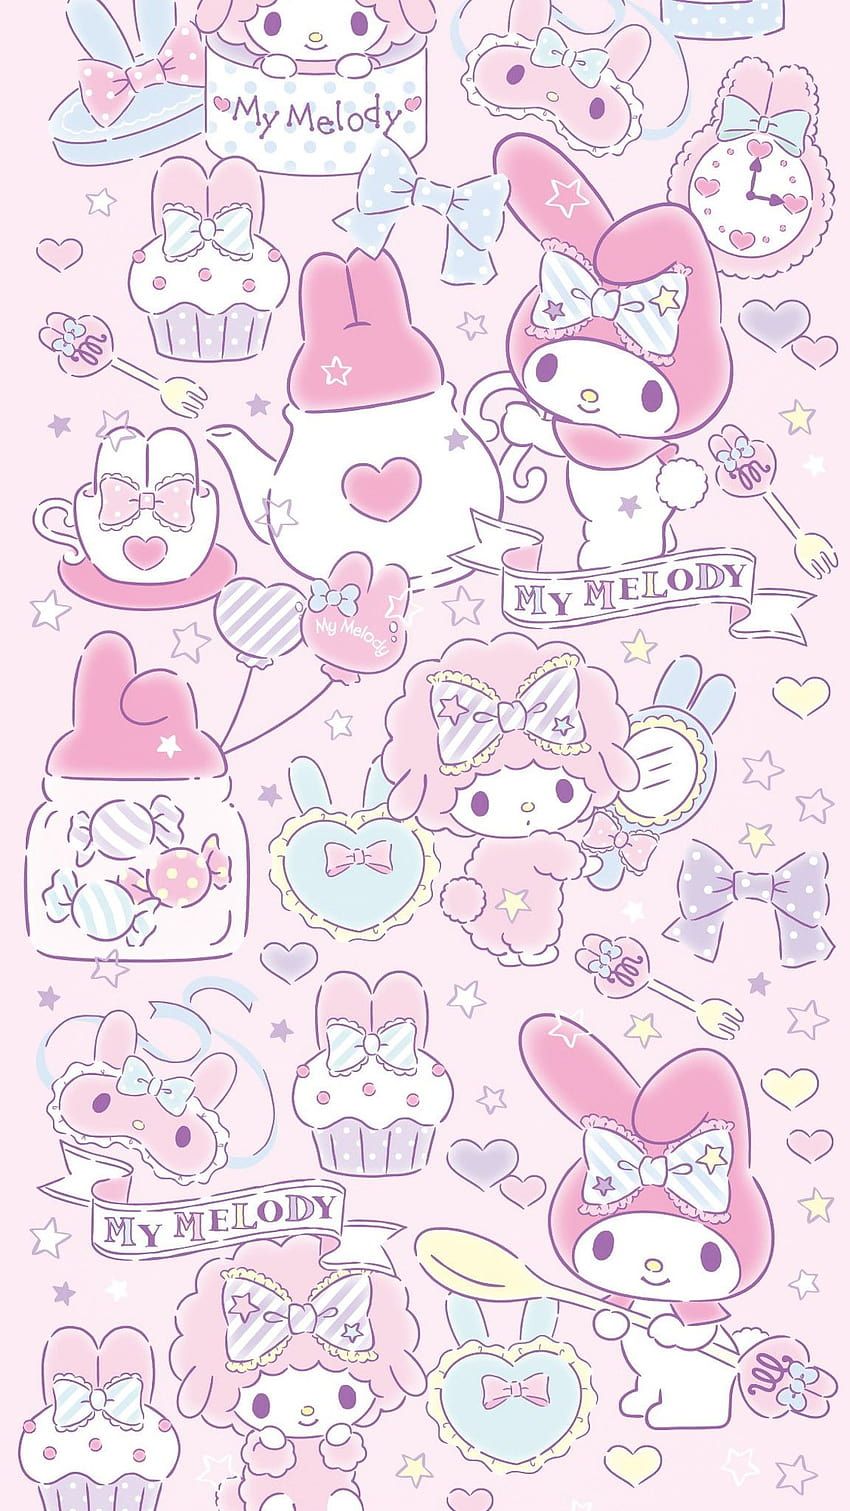 My Melody wallpaper I made for my phone! - My Melody